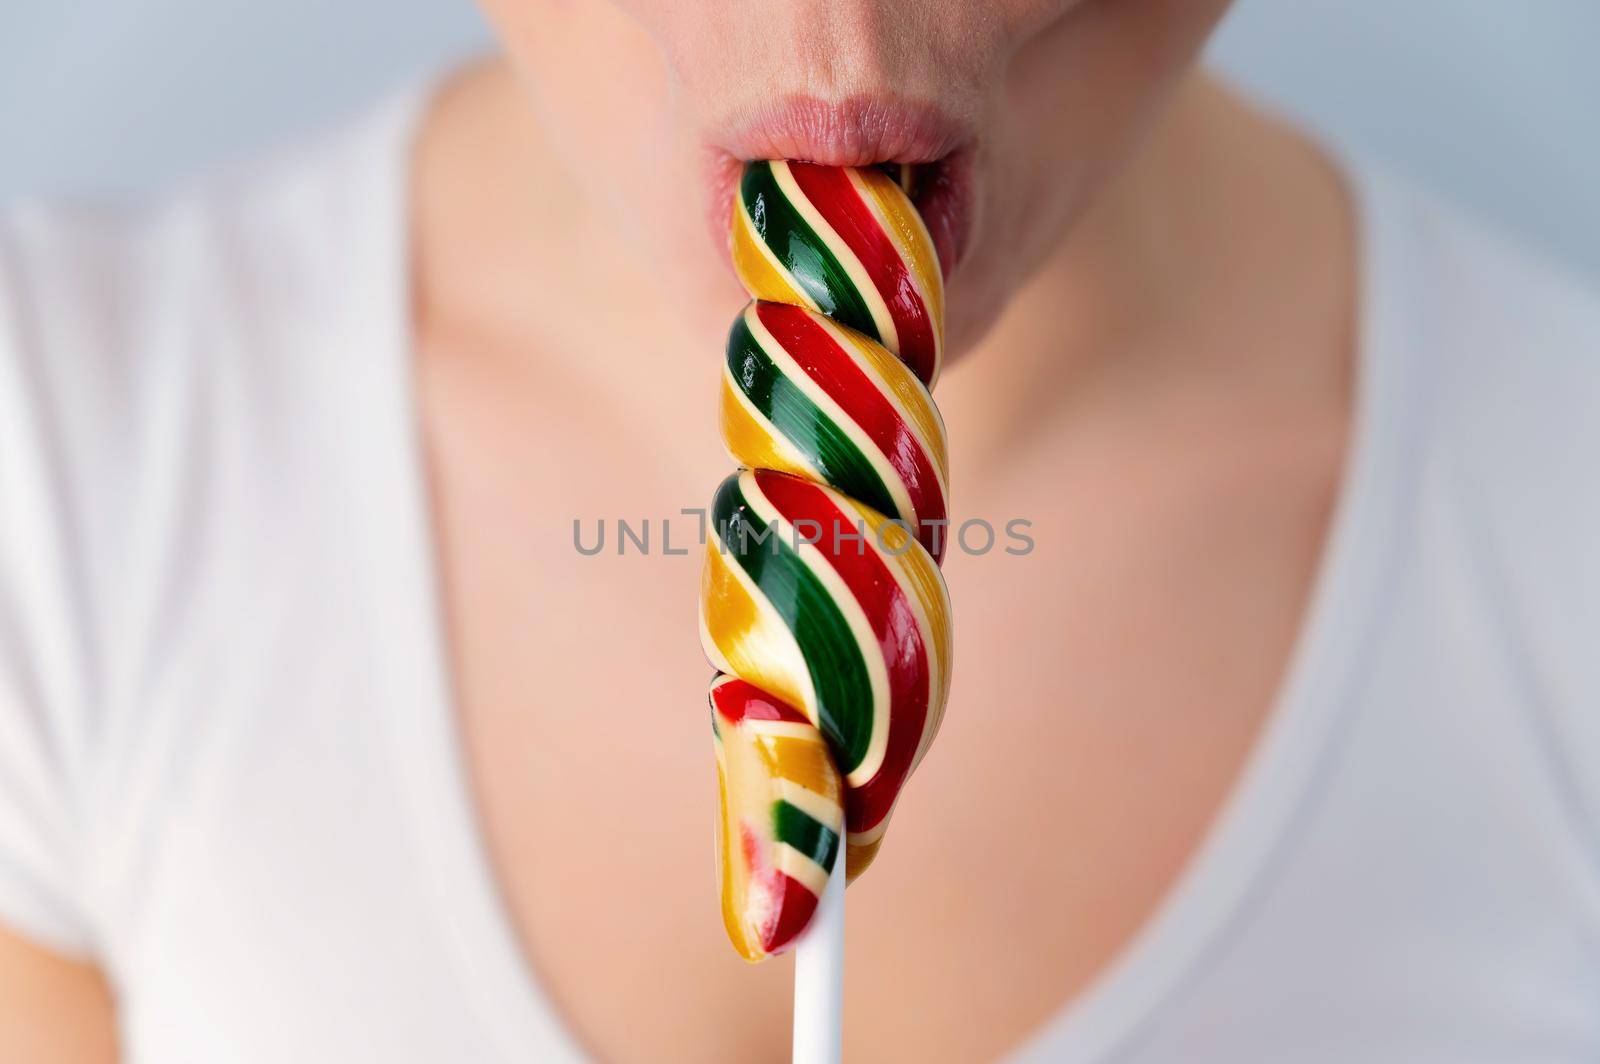 Close-up portrait of a woman sucking a long lollipop against a white background. Blowjob simulation by mrwed54